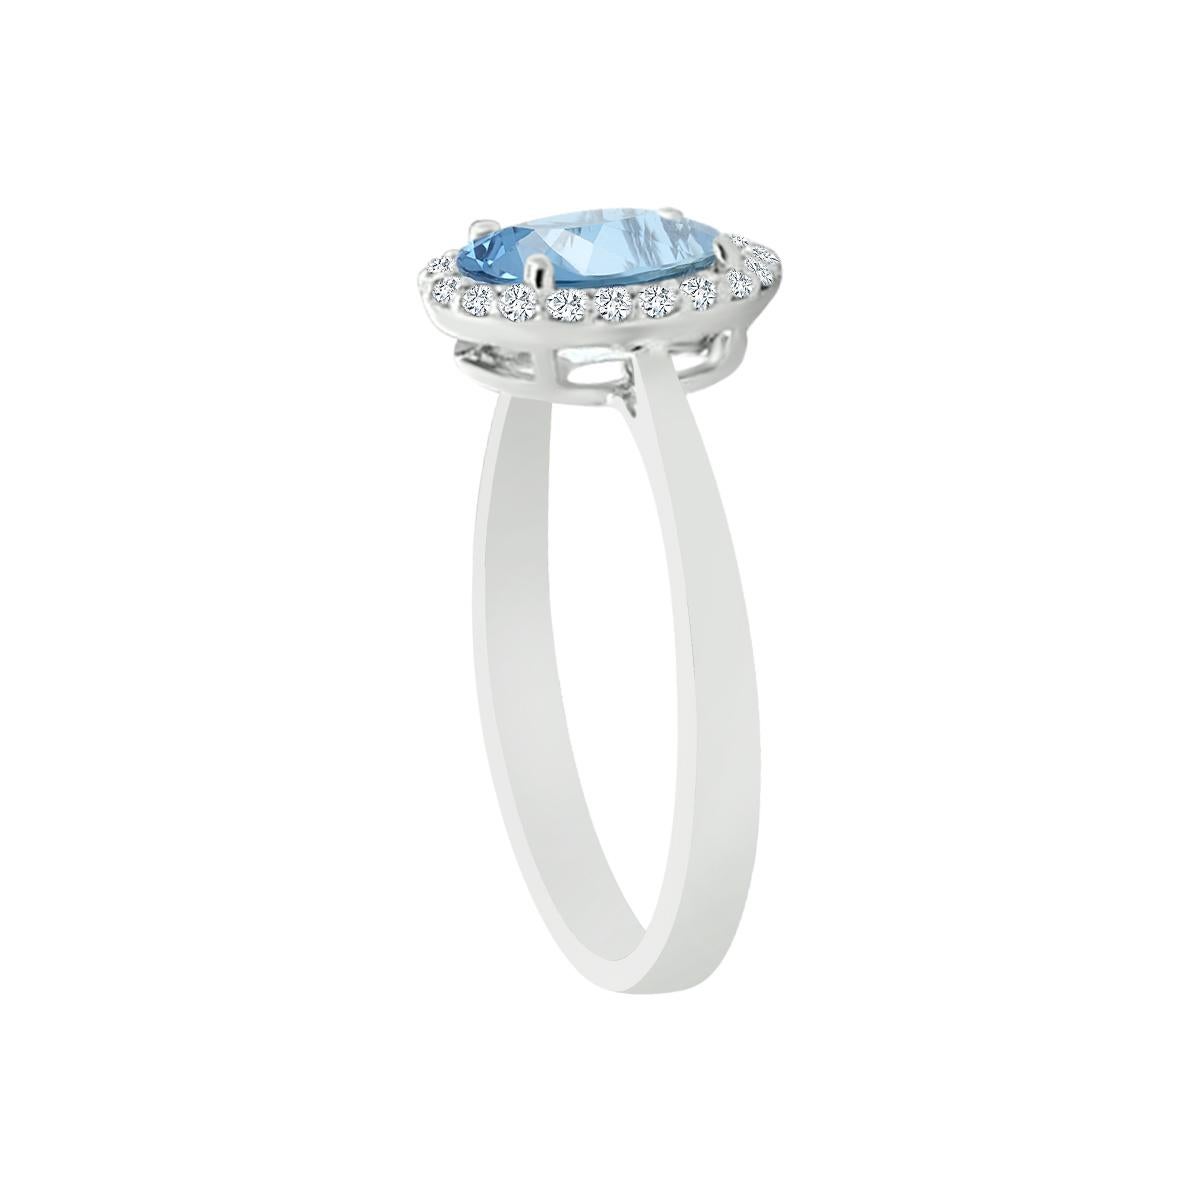 Modern 14K White Gold 1.10cts Aquamarine And Diamond Ring. Style# TS1247AQR 21056/3 For Sale